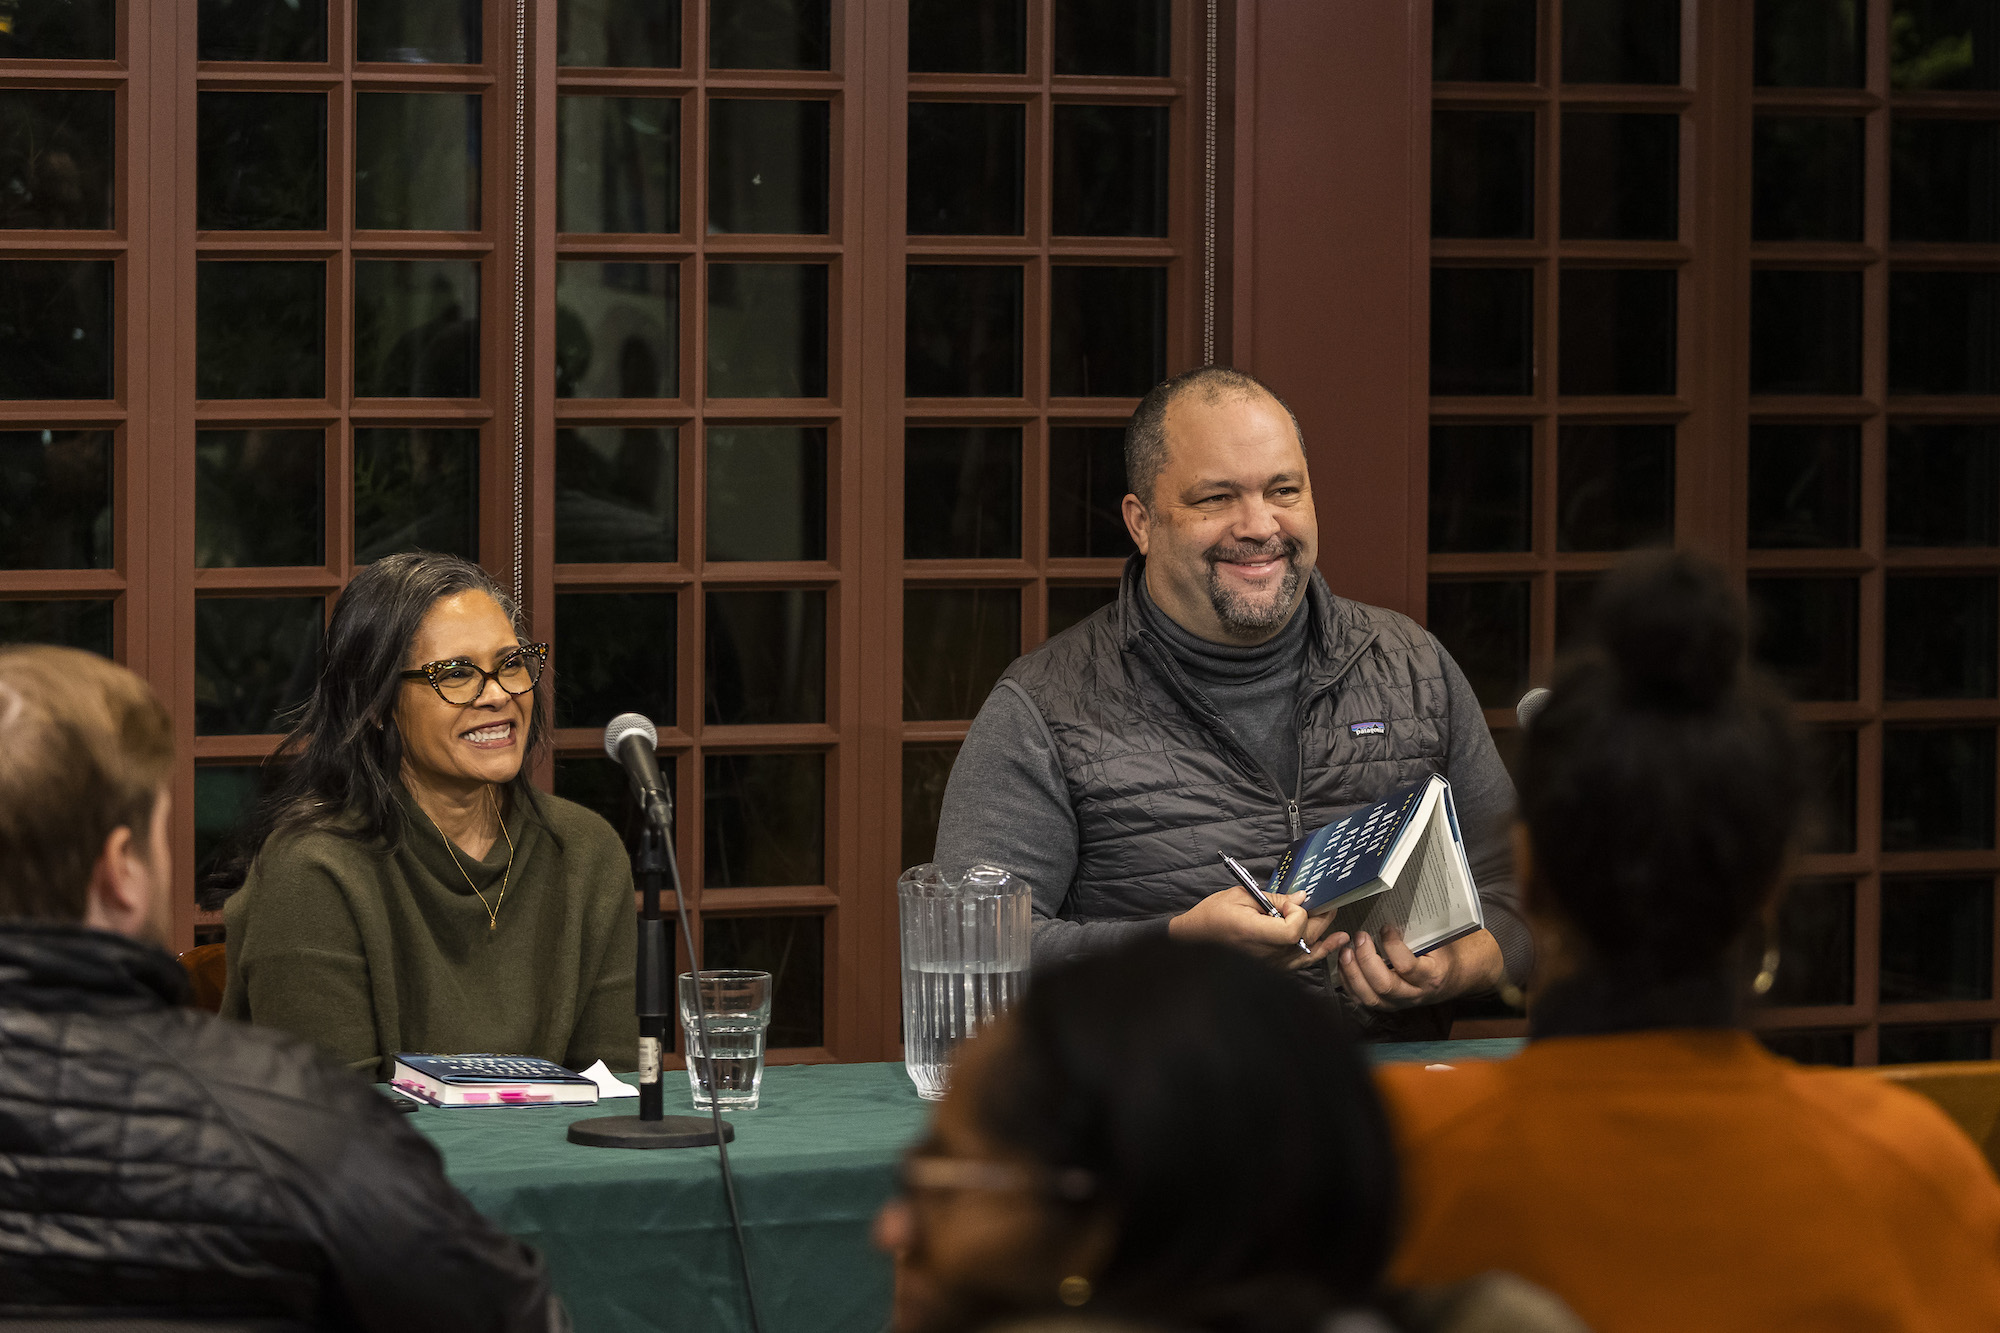 Camille Charles and Ben Jealous smile at the audience at a Kelly Writers House event.